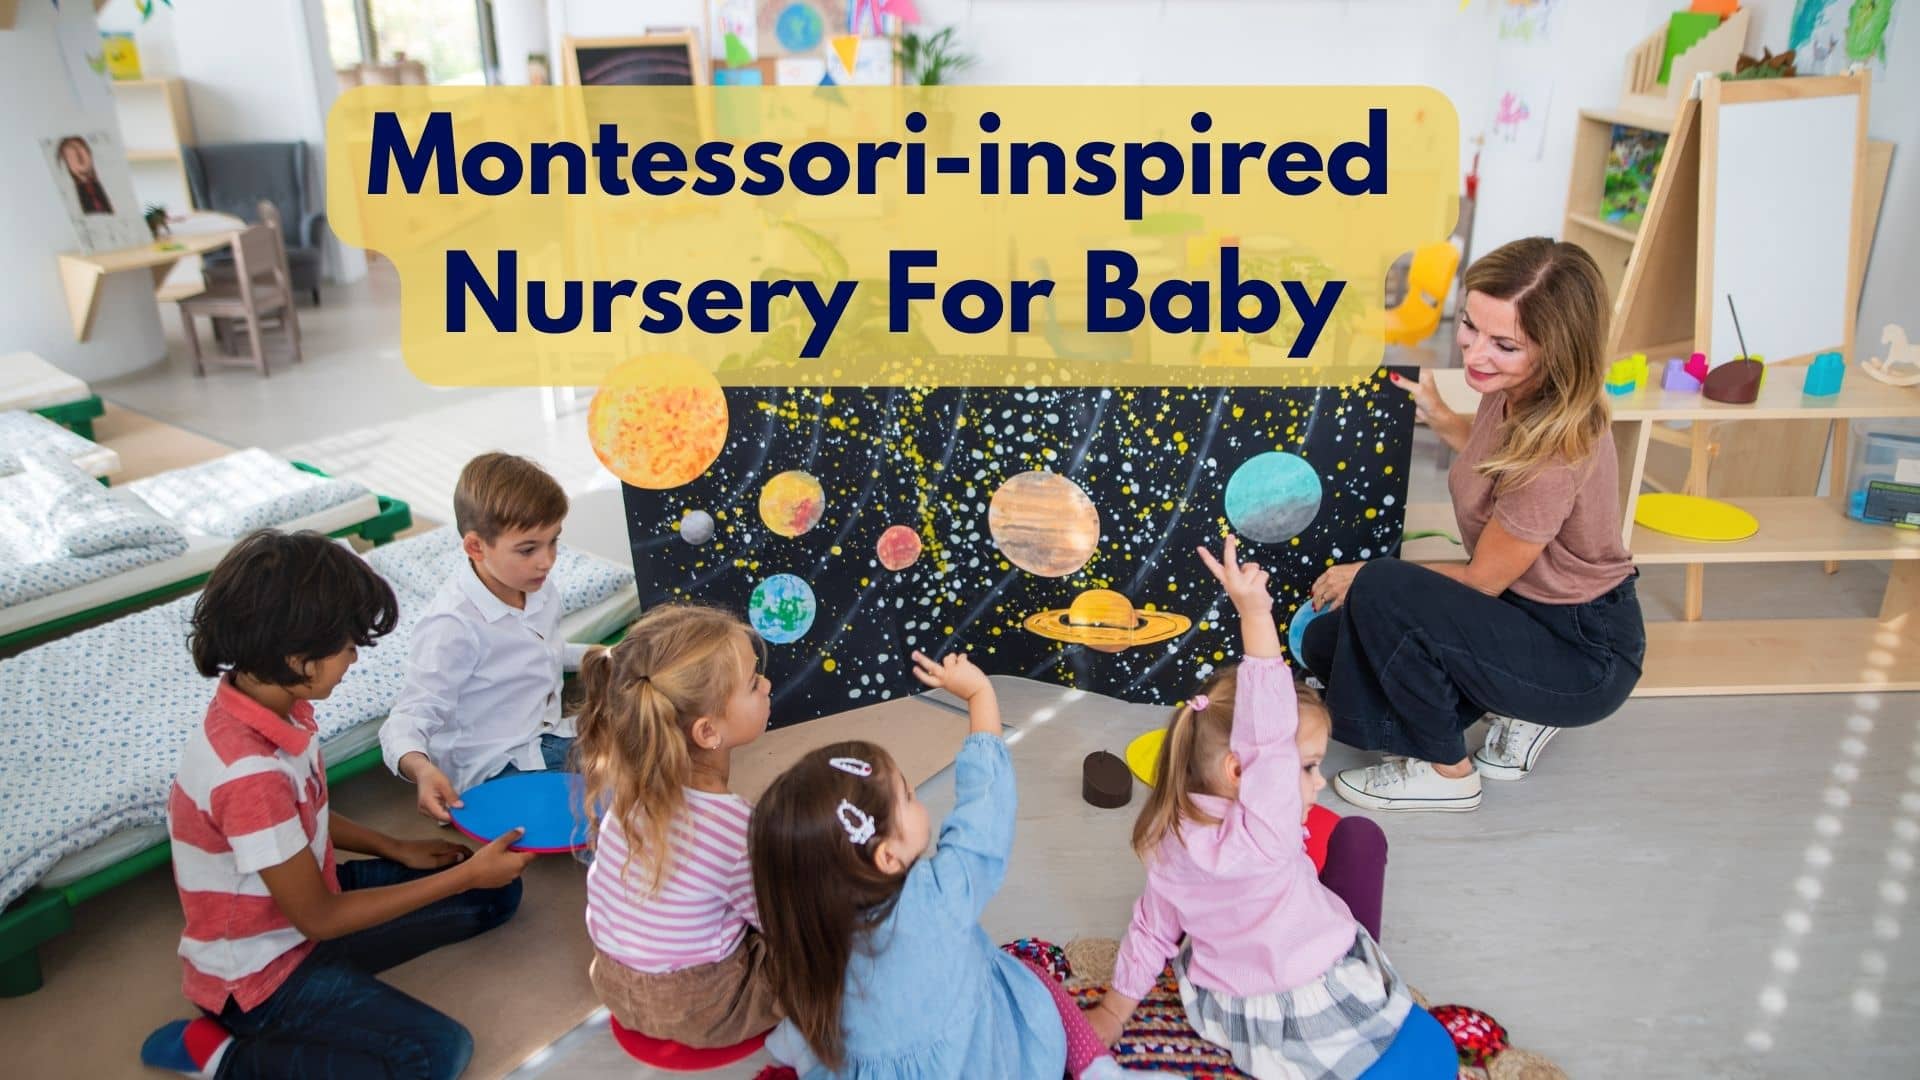 How To Create A Montessori-inspired Nursery For Baby?